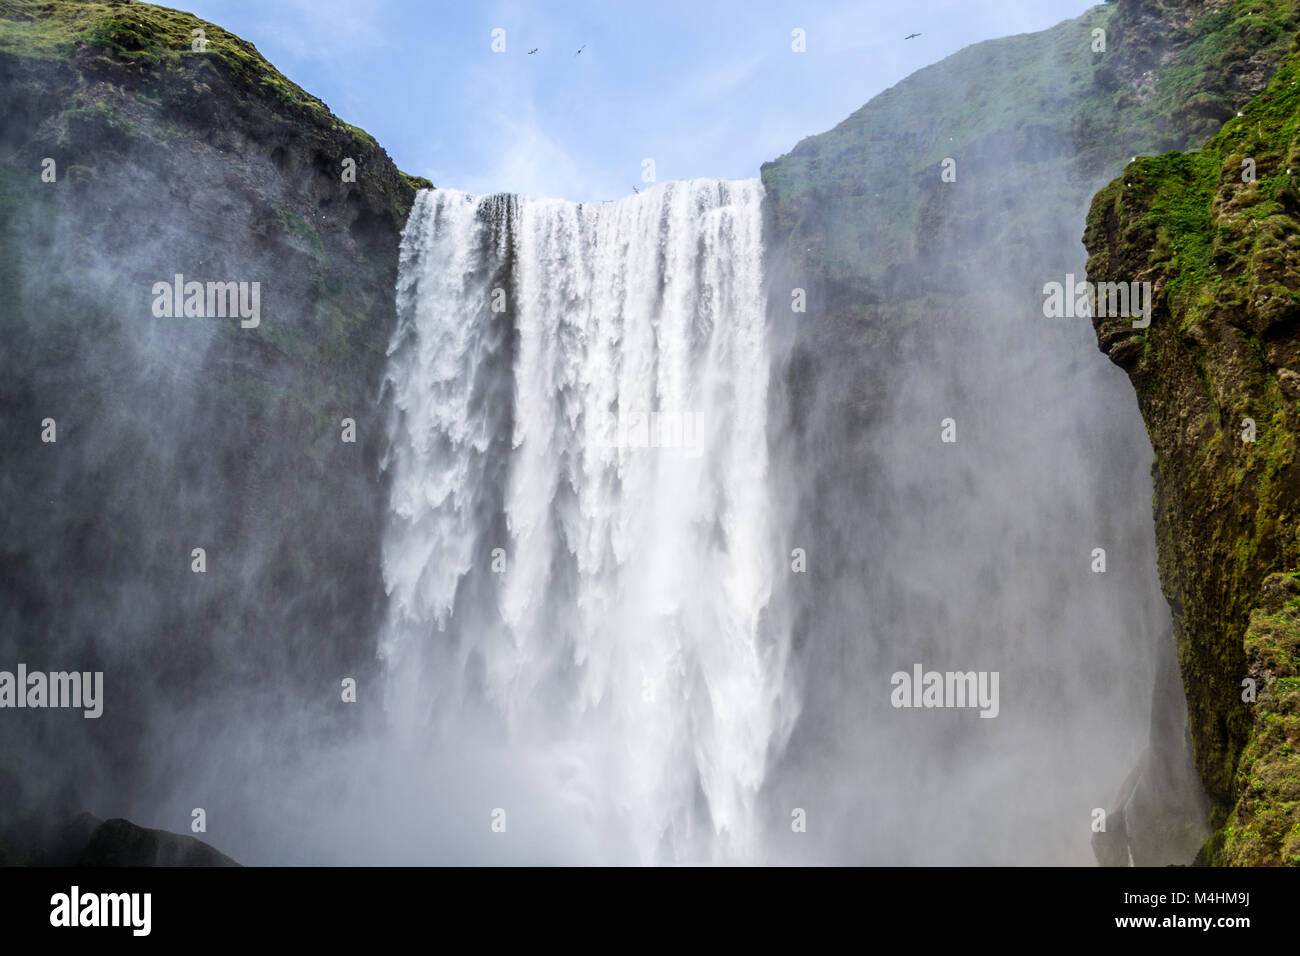 One of the hundreds of wter falls in Iceland Stock Photo